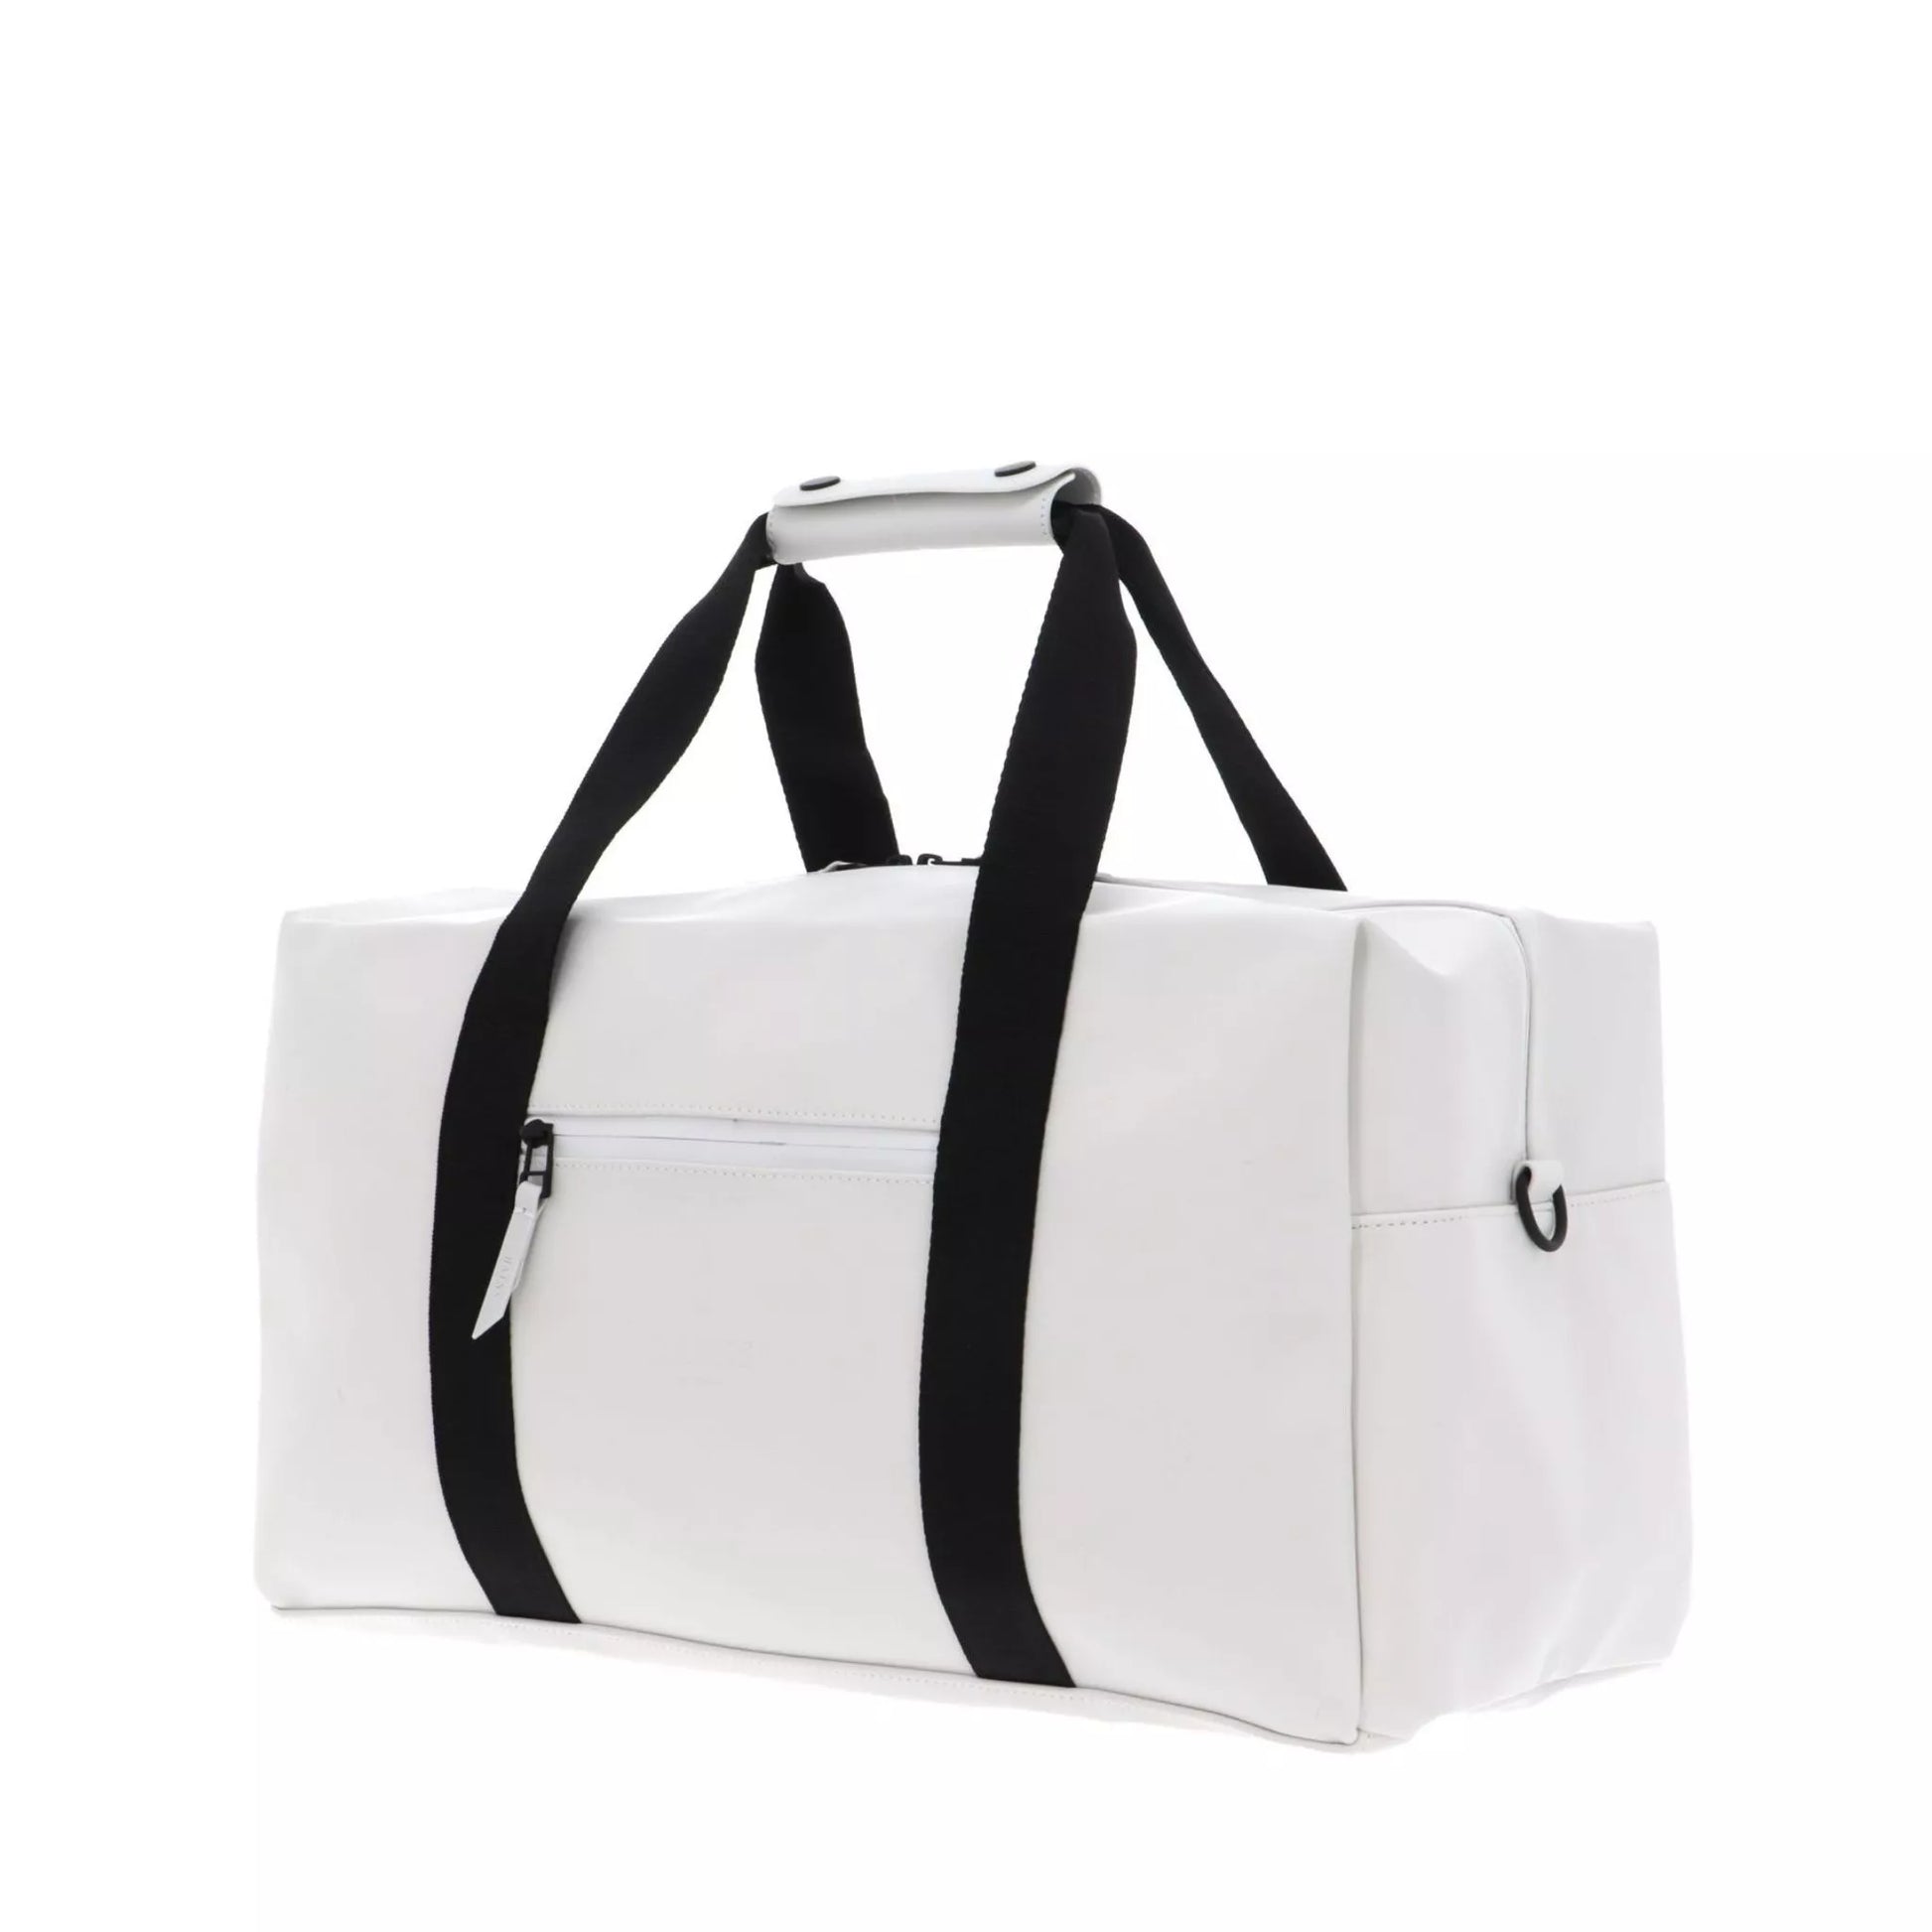 Rains waterproof gym bag off white for men and women front and side view